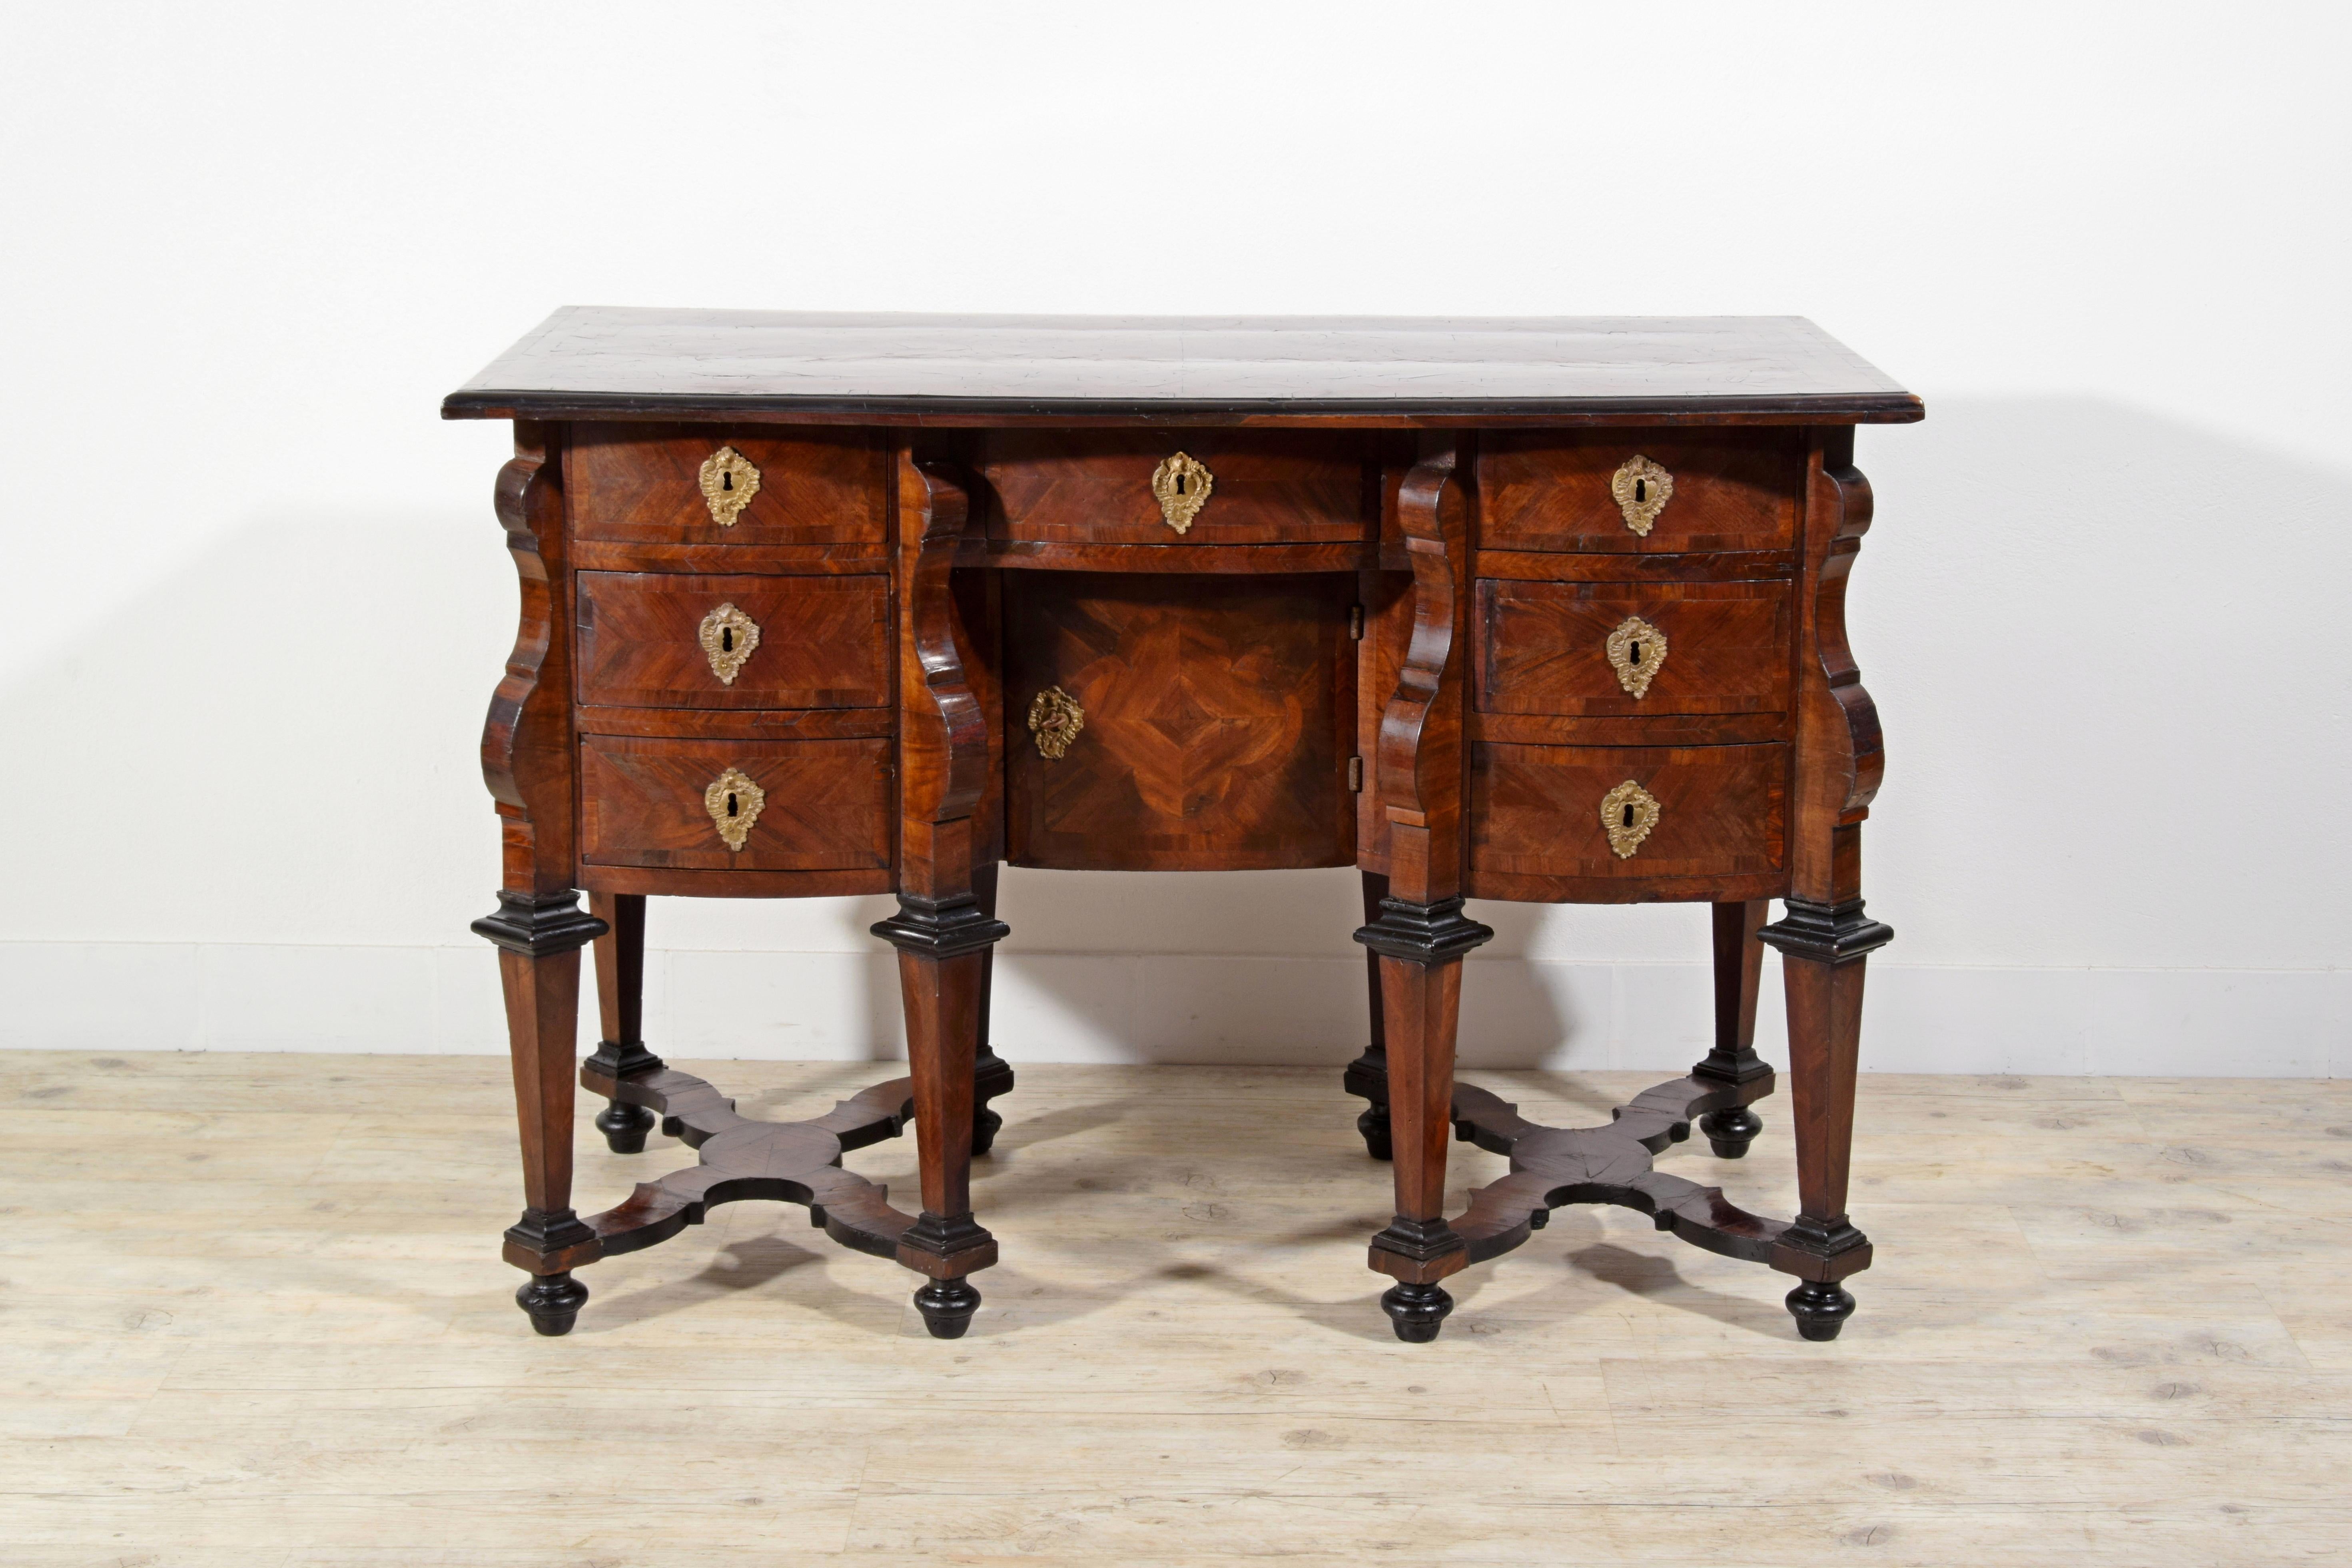 18th Century, Italian veneered wood Bureau Mazzarina
This Mazzarina desk was made in the Baroque period, in the early eighteenth century, in Turin, inspired by the models of furniture spread at the court of Louis XIV.
The cabinet is made of wood